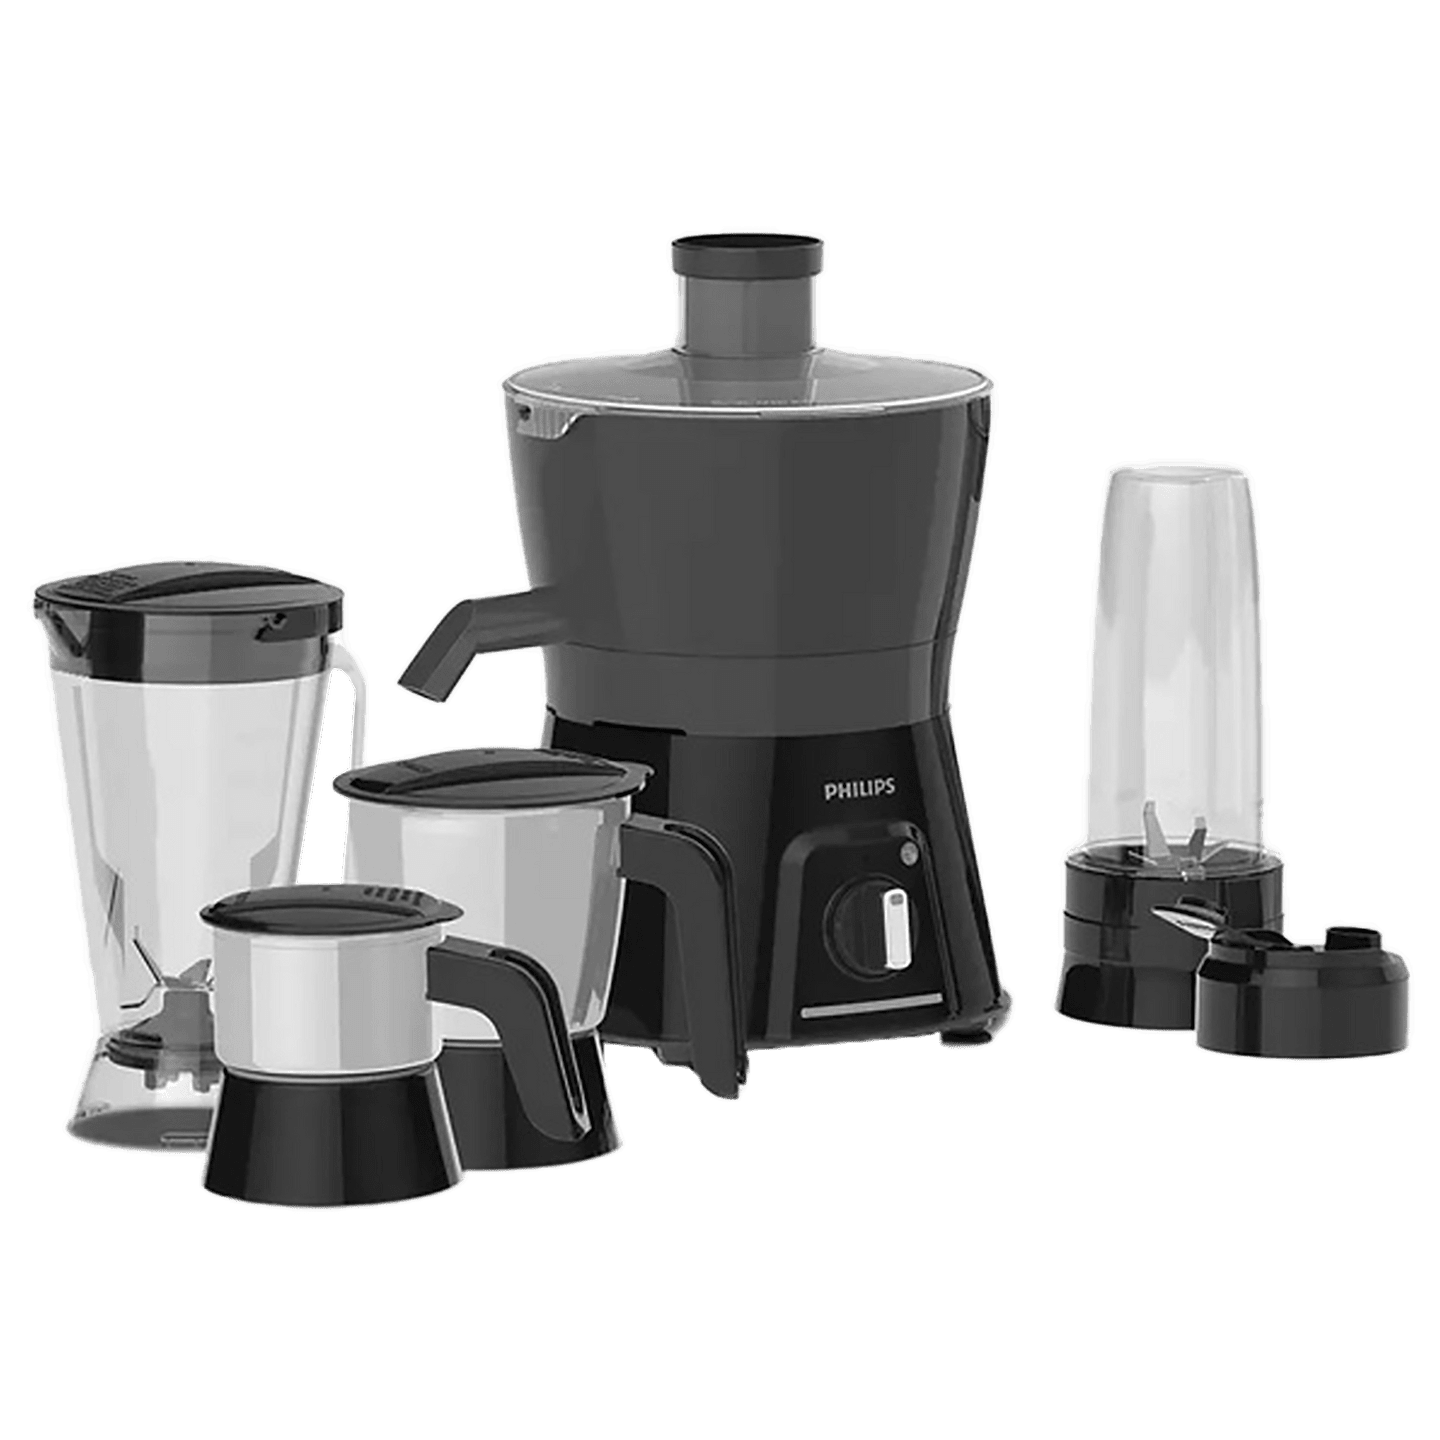 Philips Viva Collection 600 Watts 3 Jars Juicer (Blend And Carry Sipper, Hl7580/00, Black)